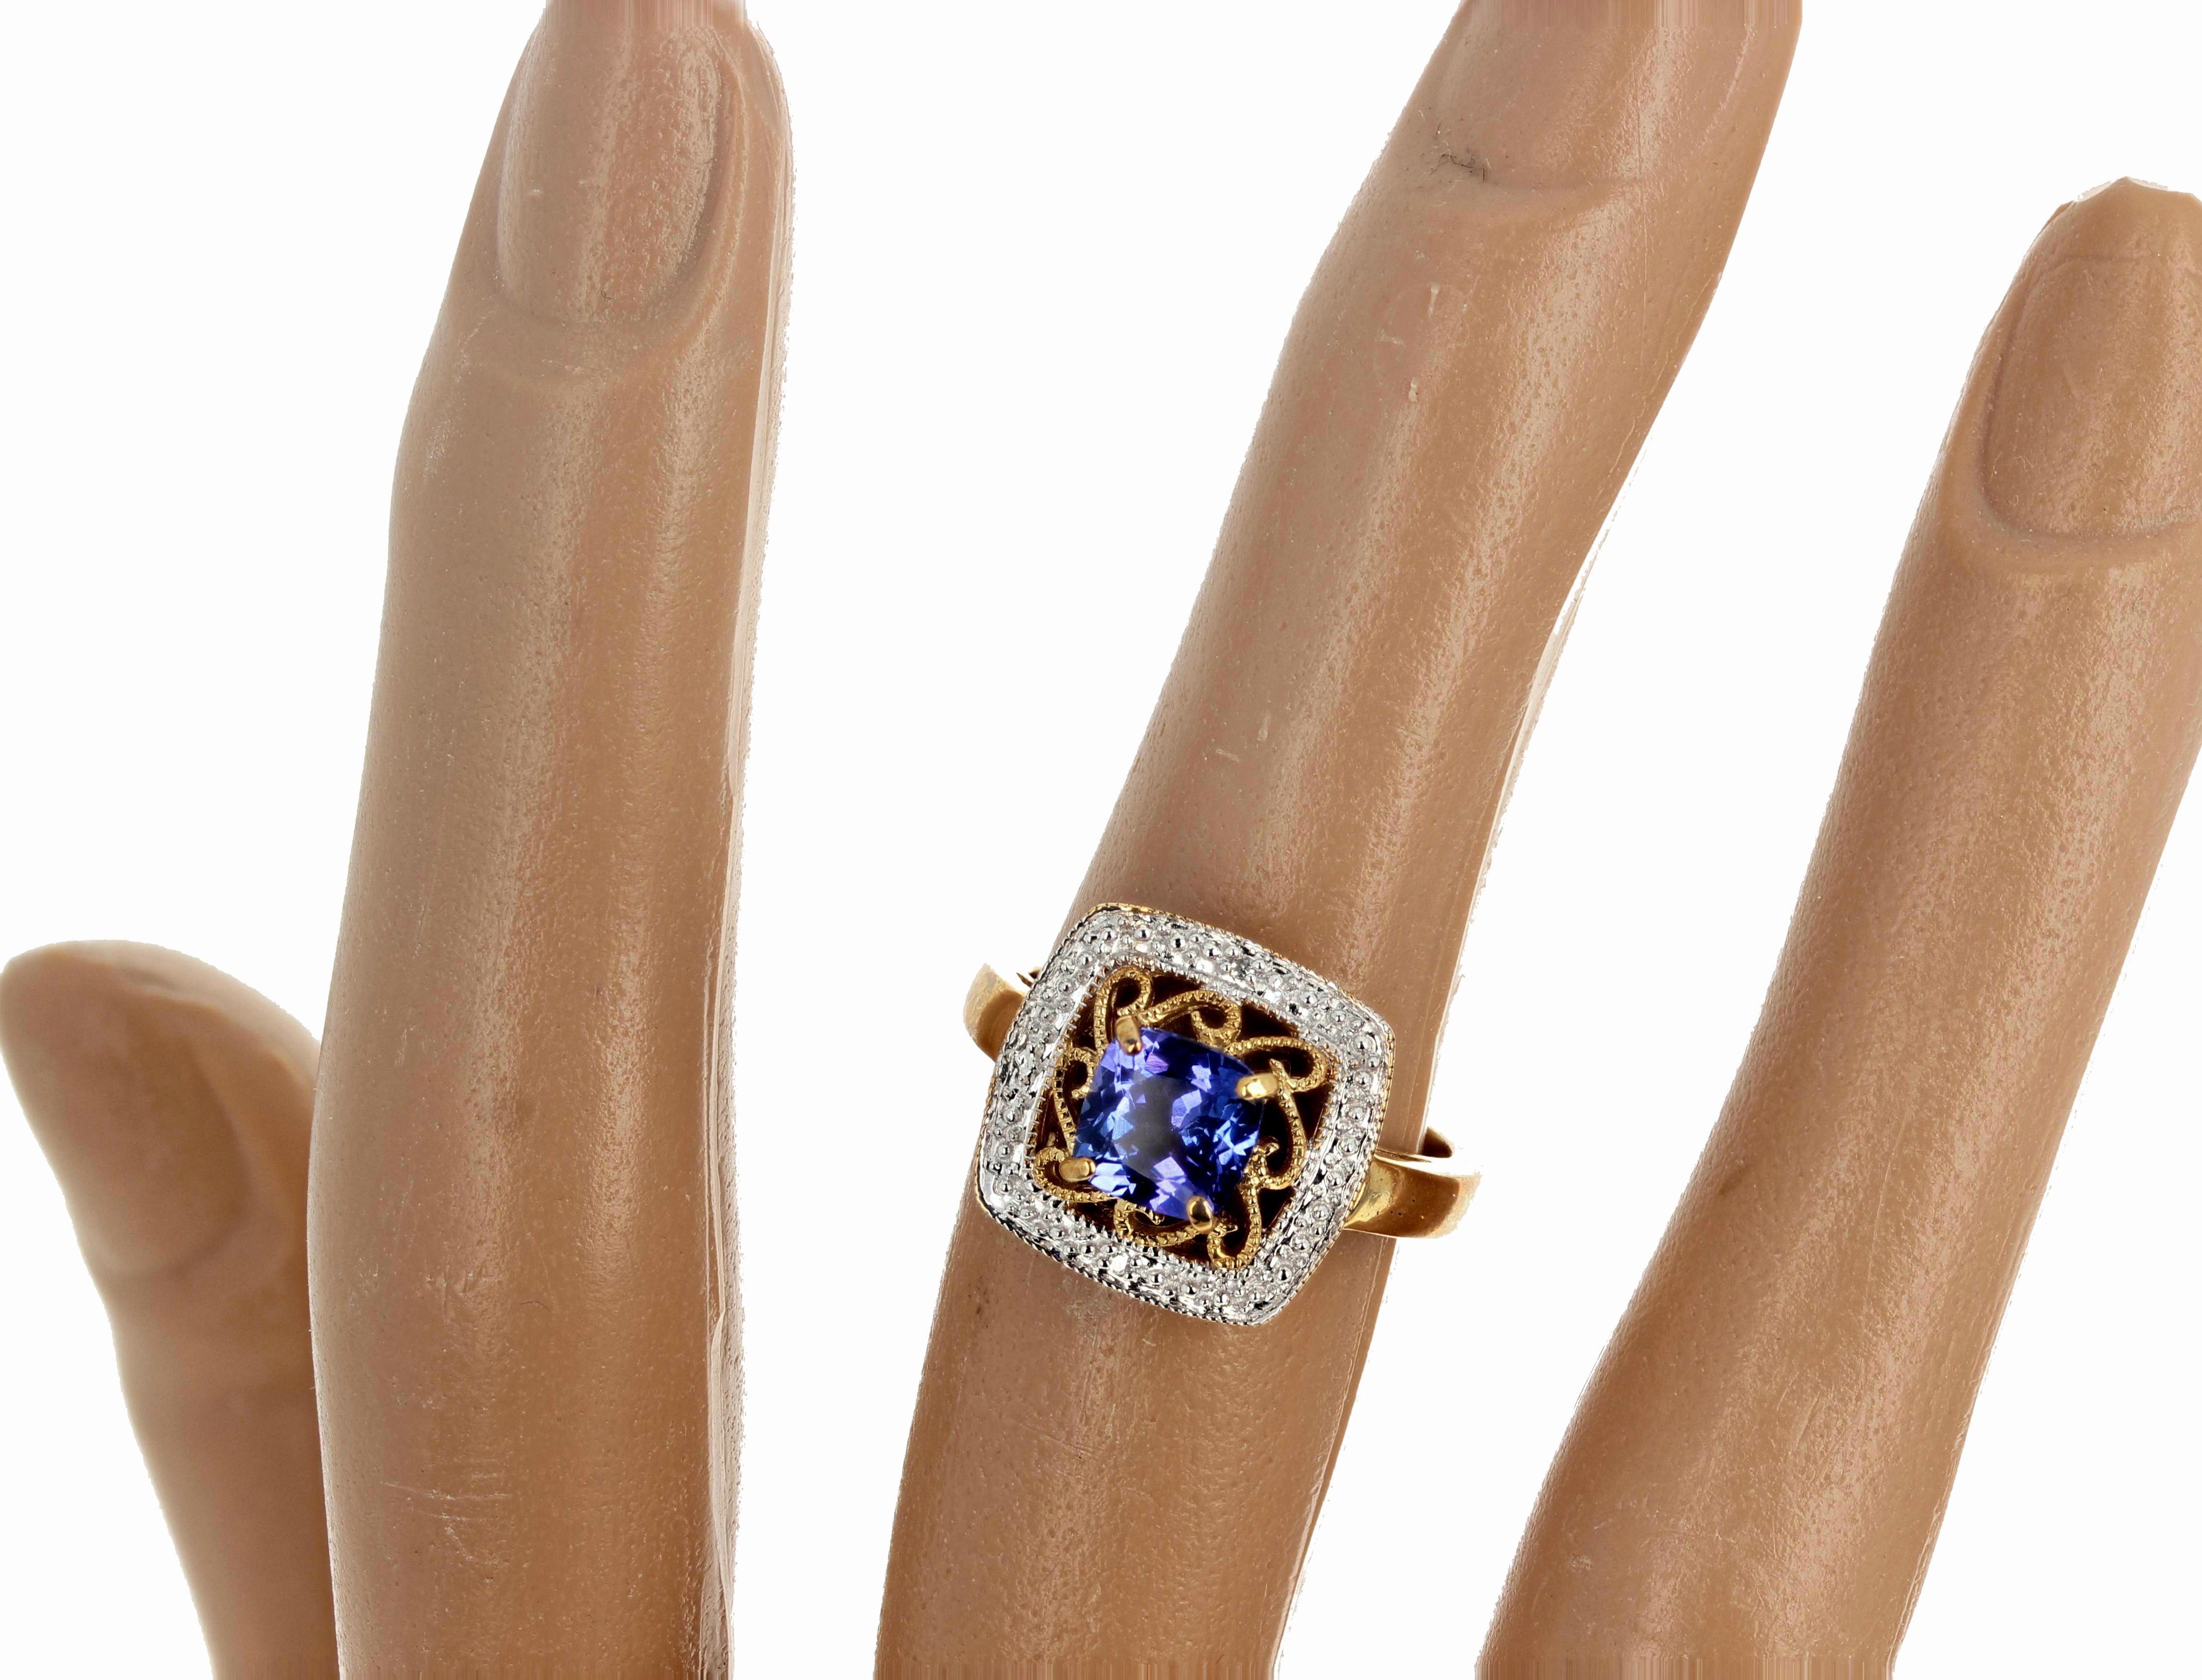 Glittering brilliant square cushion cut 1.35 carat blue Tanzanite (6.1mm x 6.1mm) enhanced with tiny white Diamonds set in an elegant 10K yellow gold ring size 7 (sizable for free).  This is really a very beautiful ring that will go to weddings,